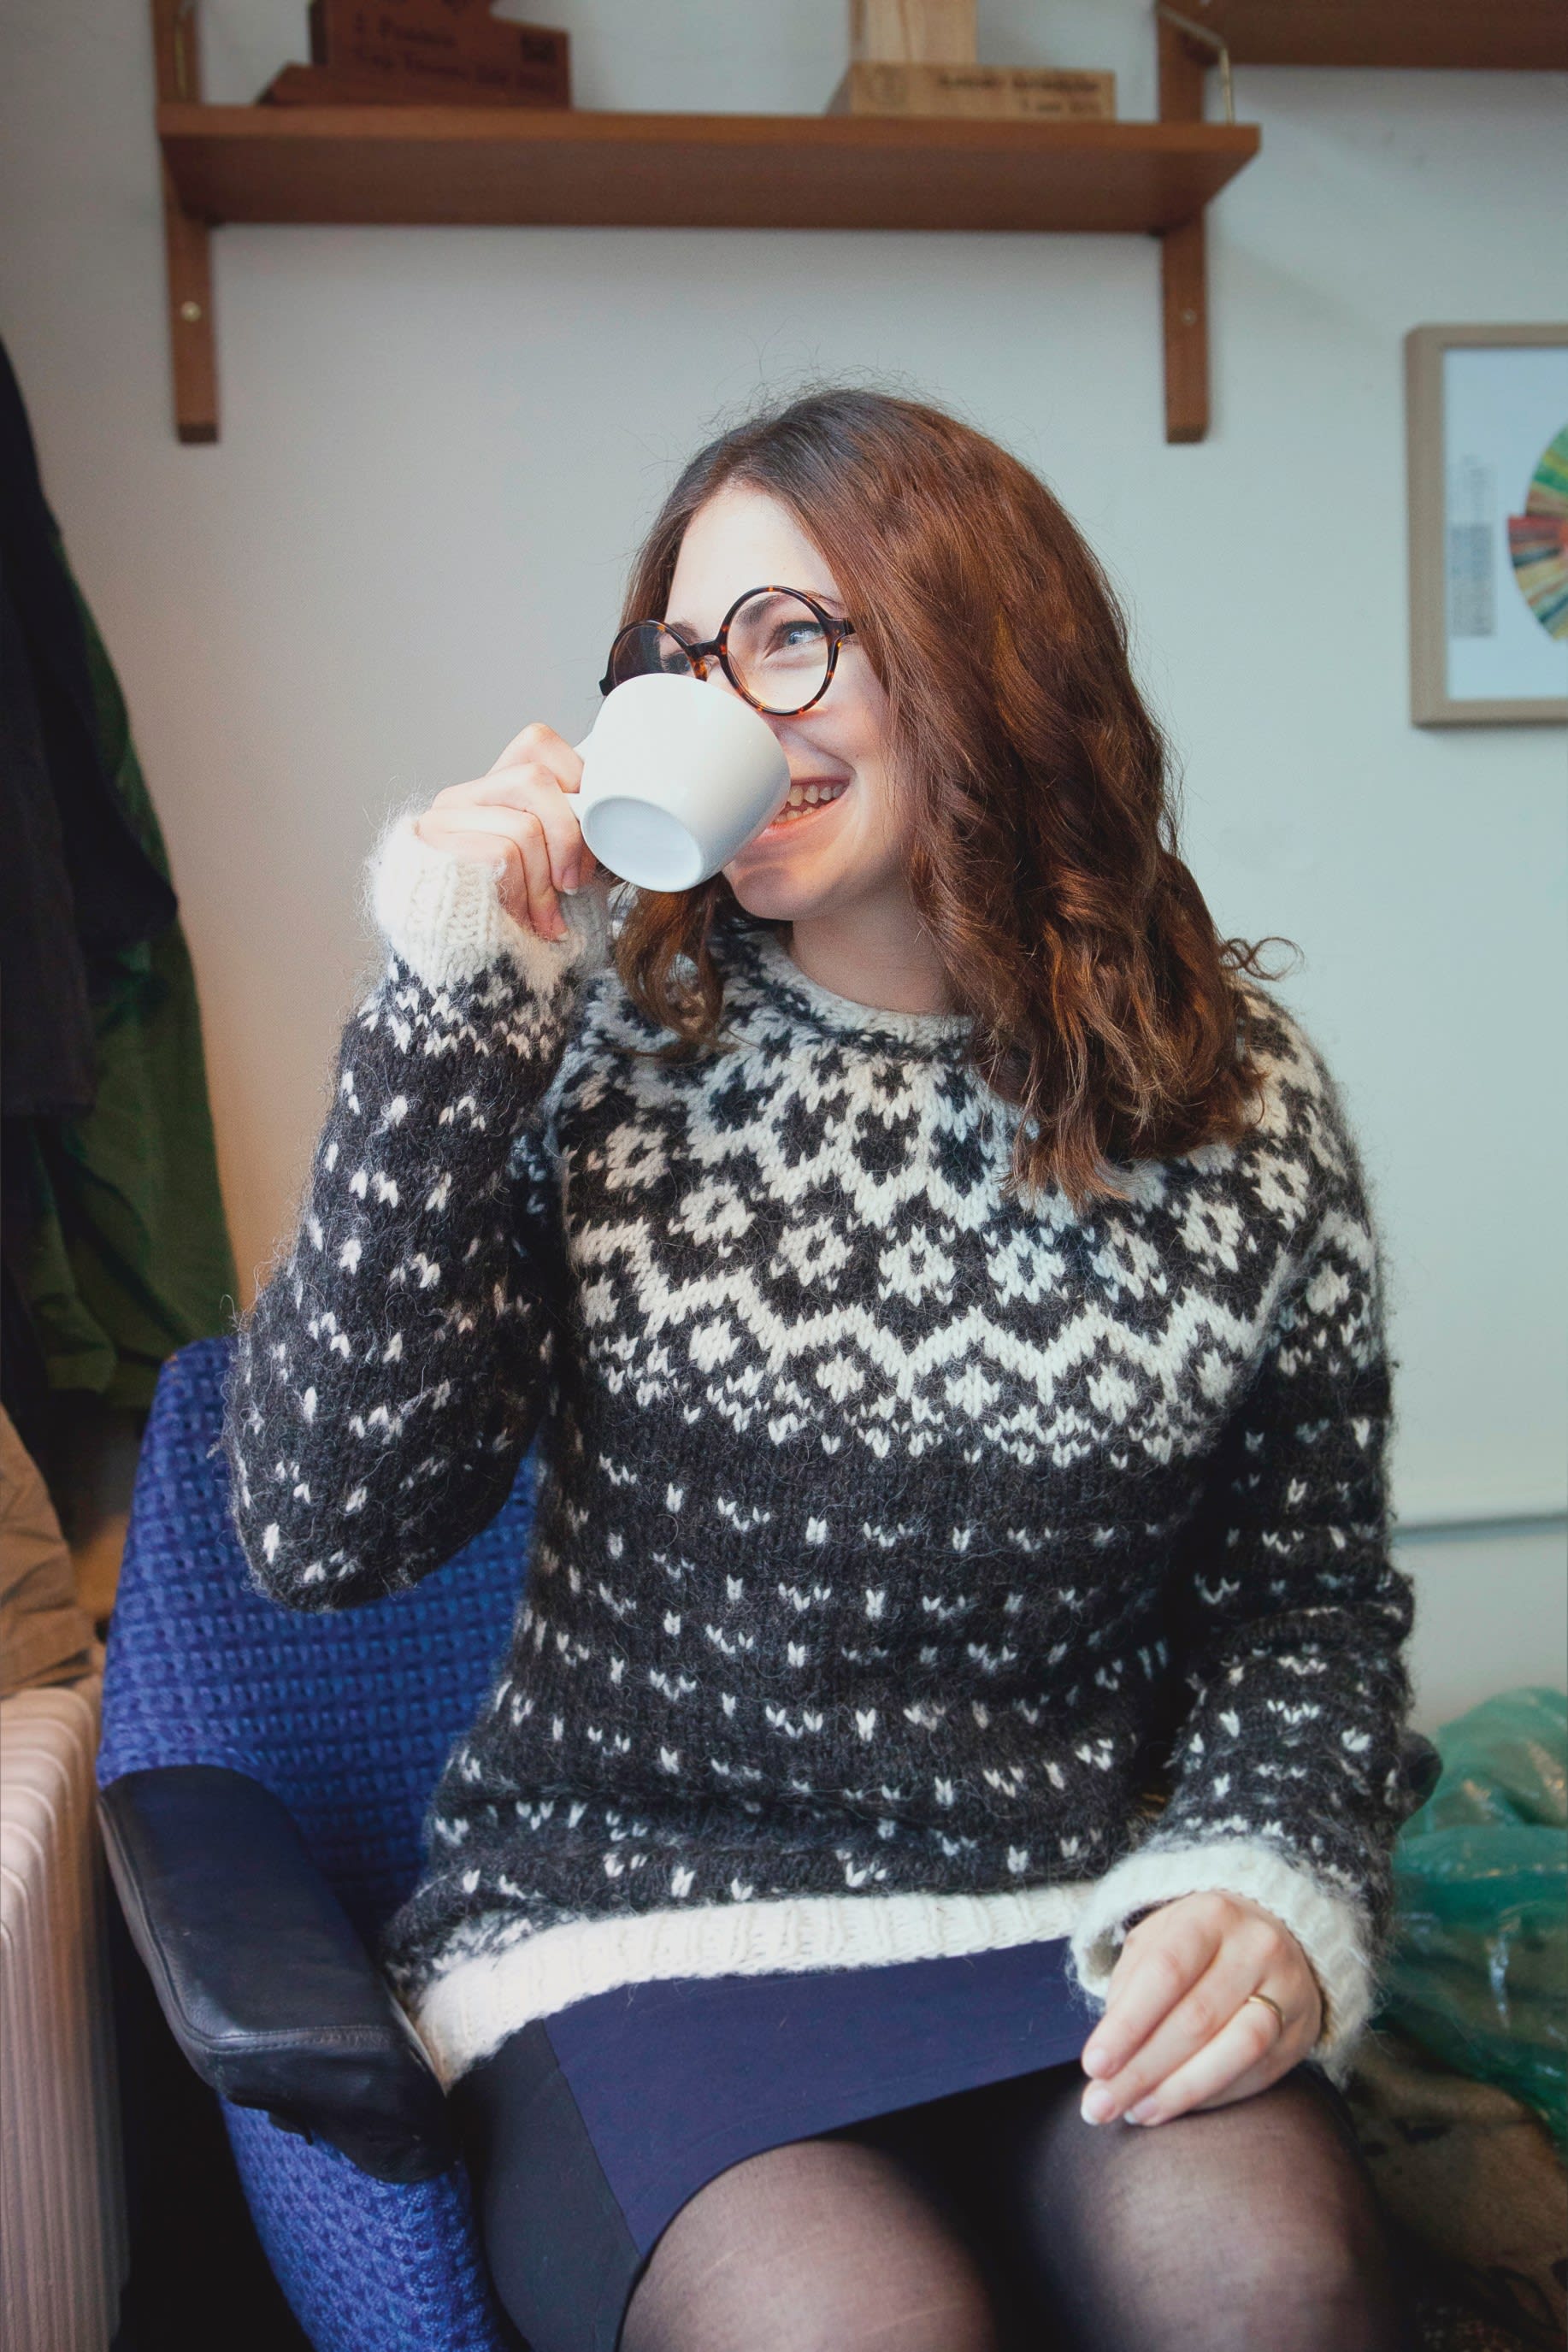 a woman with brown curly hair drinking from a white cup in a cafe and wearing a black and white knitted Icelandic sweater